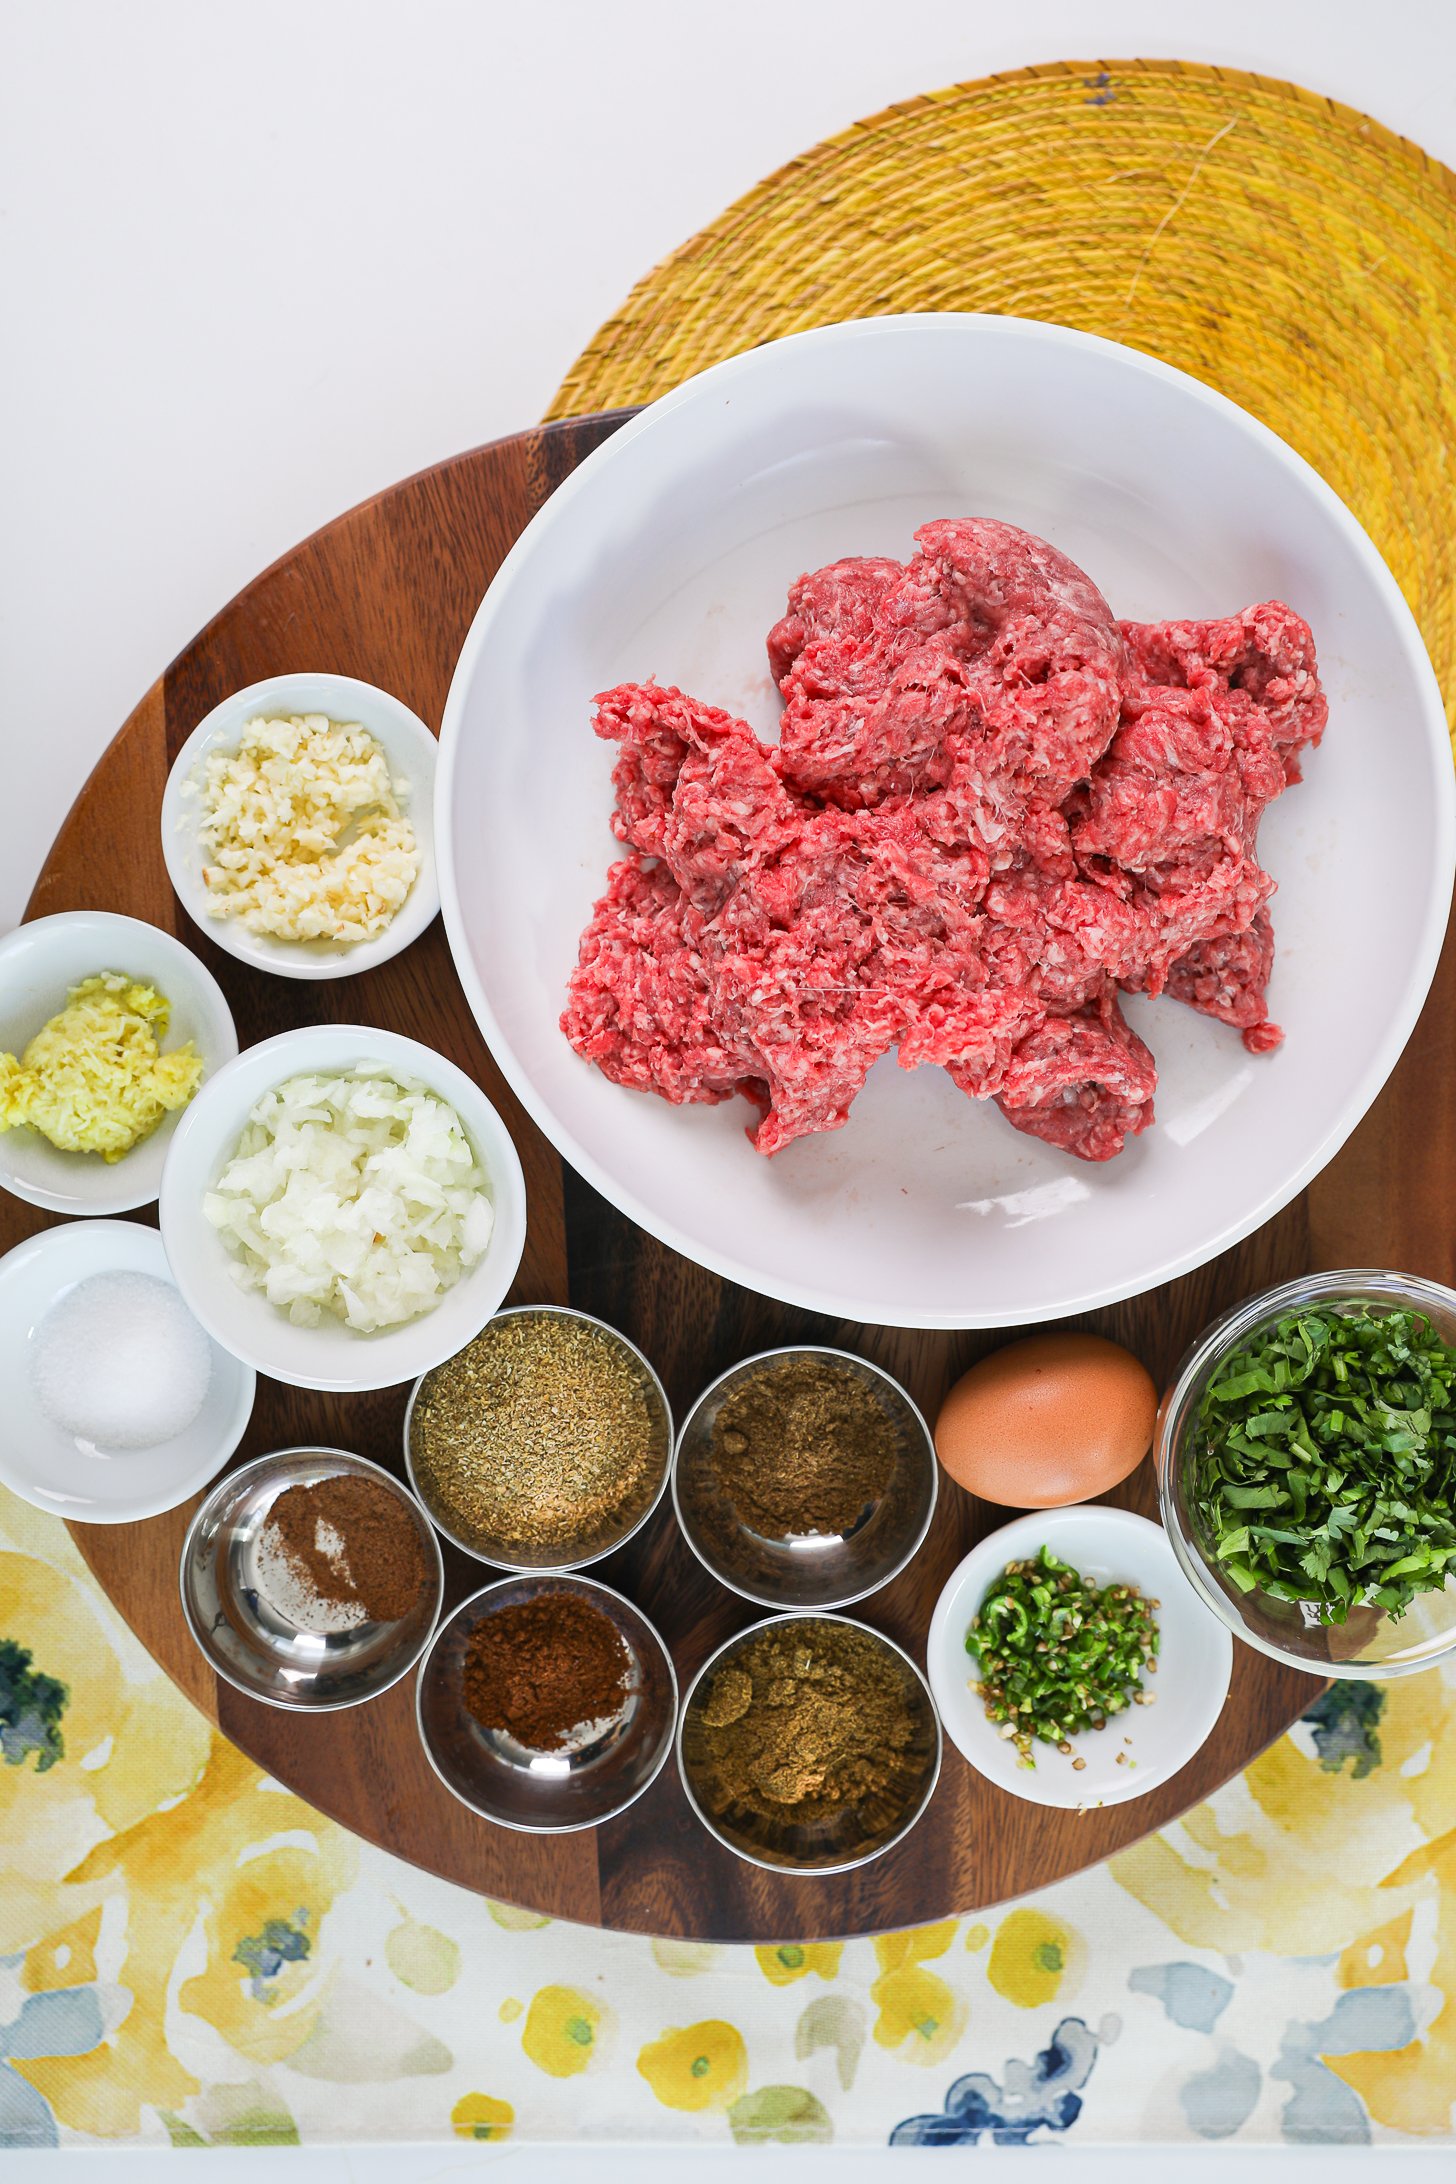 A selection of food ingredients including raw minced beef, ramekins of powdered spices, aromatics and herbs.